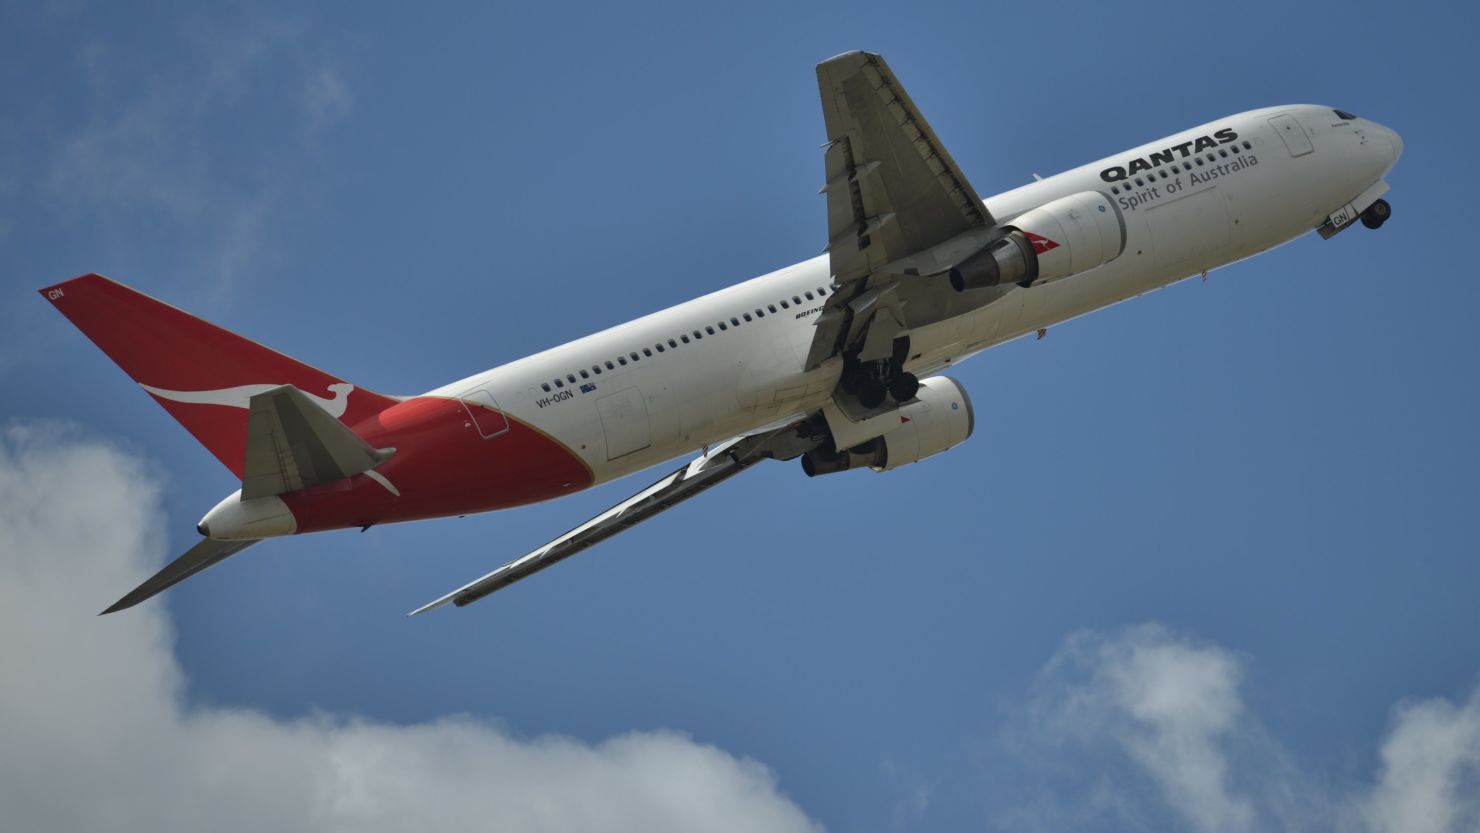 Qantas' announcement about losses comes just months after it revealed 5,000 jobs would be cut.